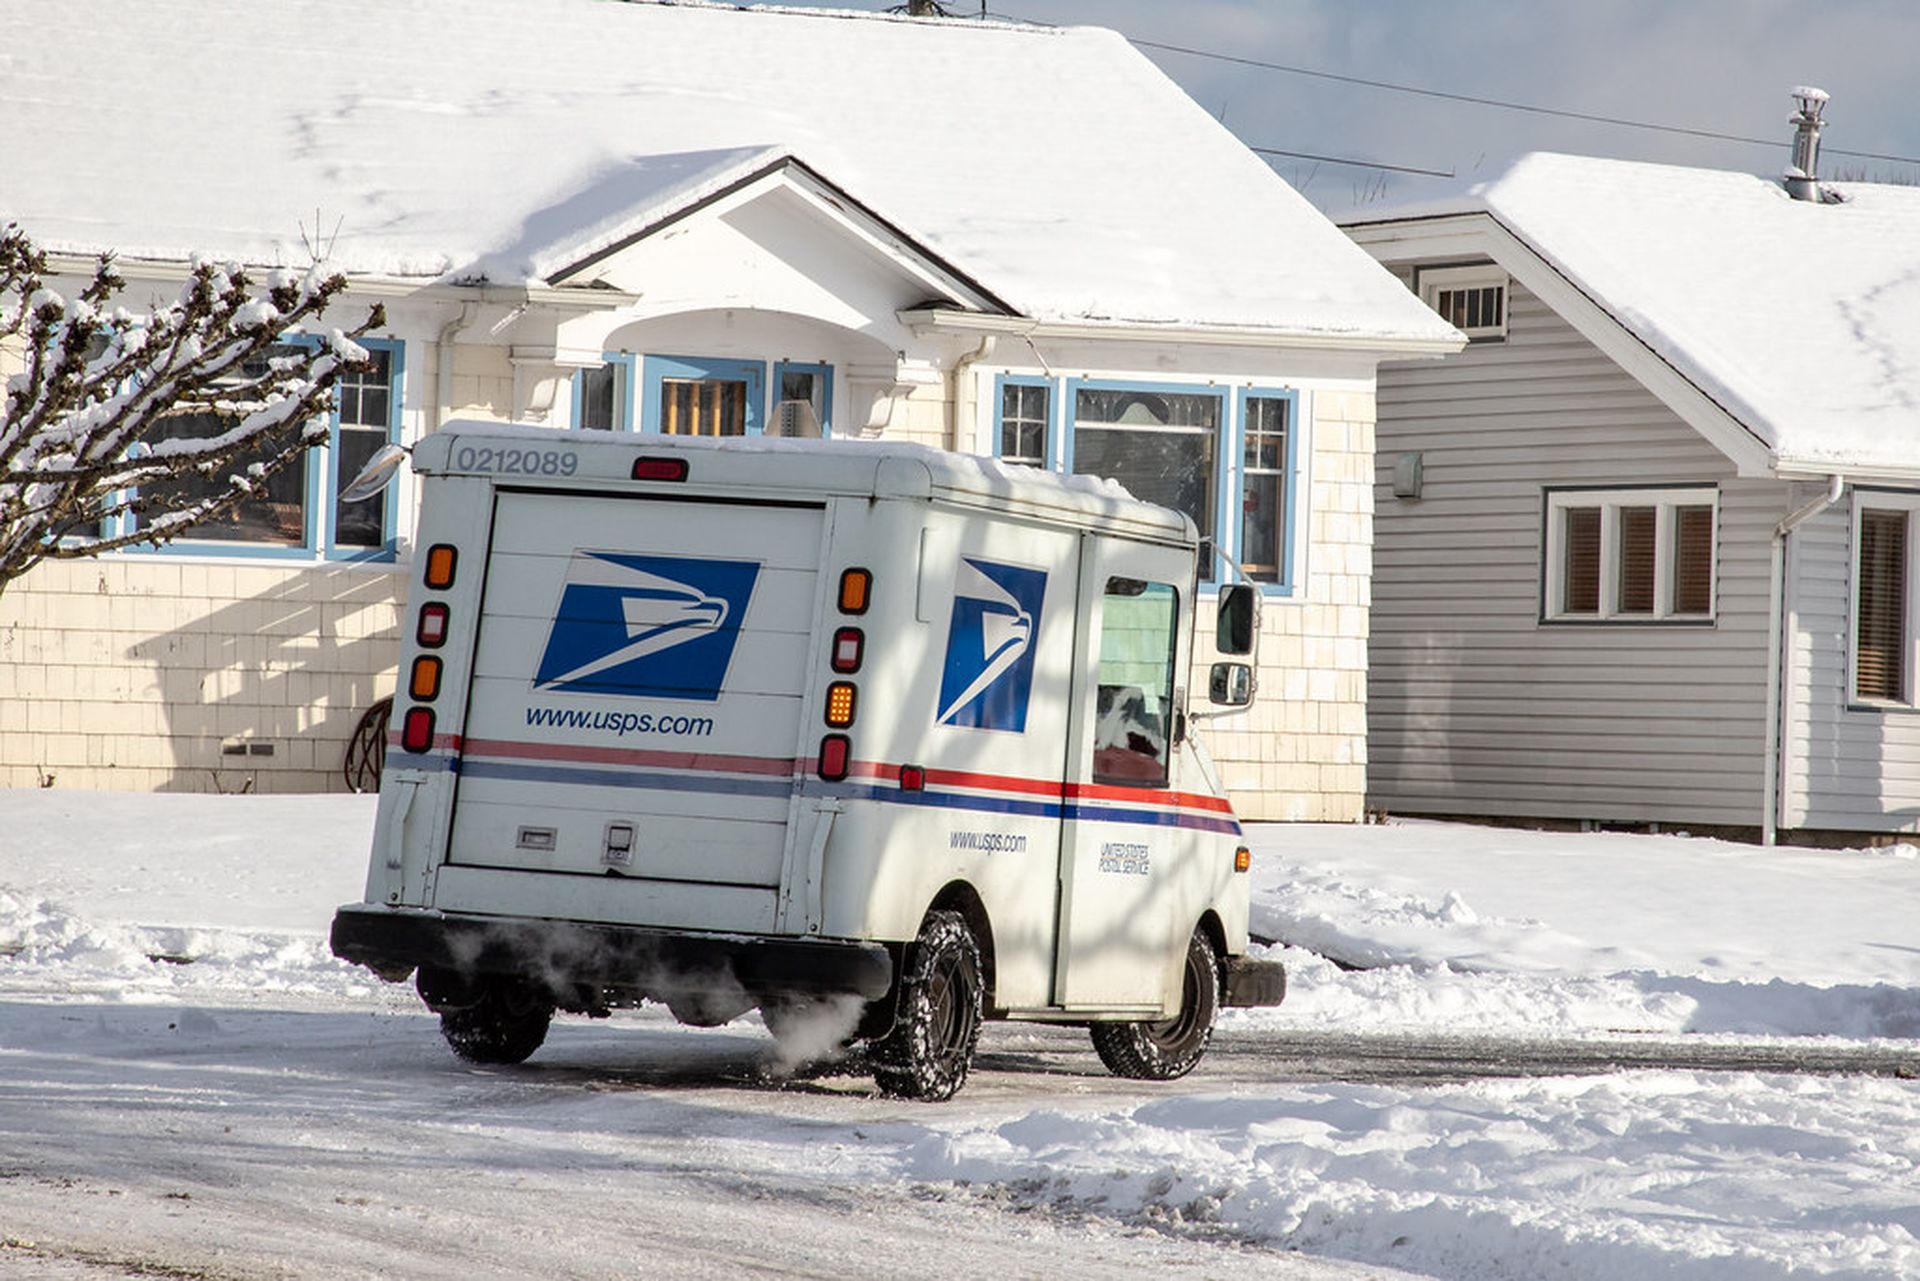 The New Jersey attorney general settled a possible HIPAA violation made by two healthcare vendors in 2016, stemming from a printing and mailing error. (Photo credit: Everett WA. / USA &#8211; 02/09/2019: US Postal Service Jeep Delivering Mail During Unusual Winter Snow Storm by ShebleyCL is licensed under CC BY 2.0)